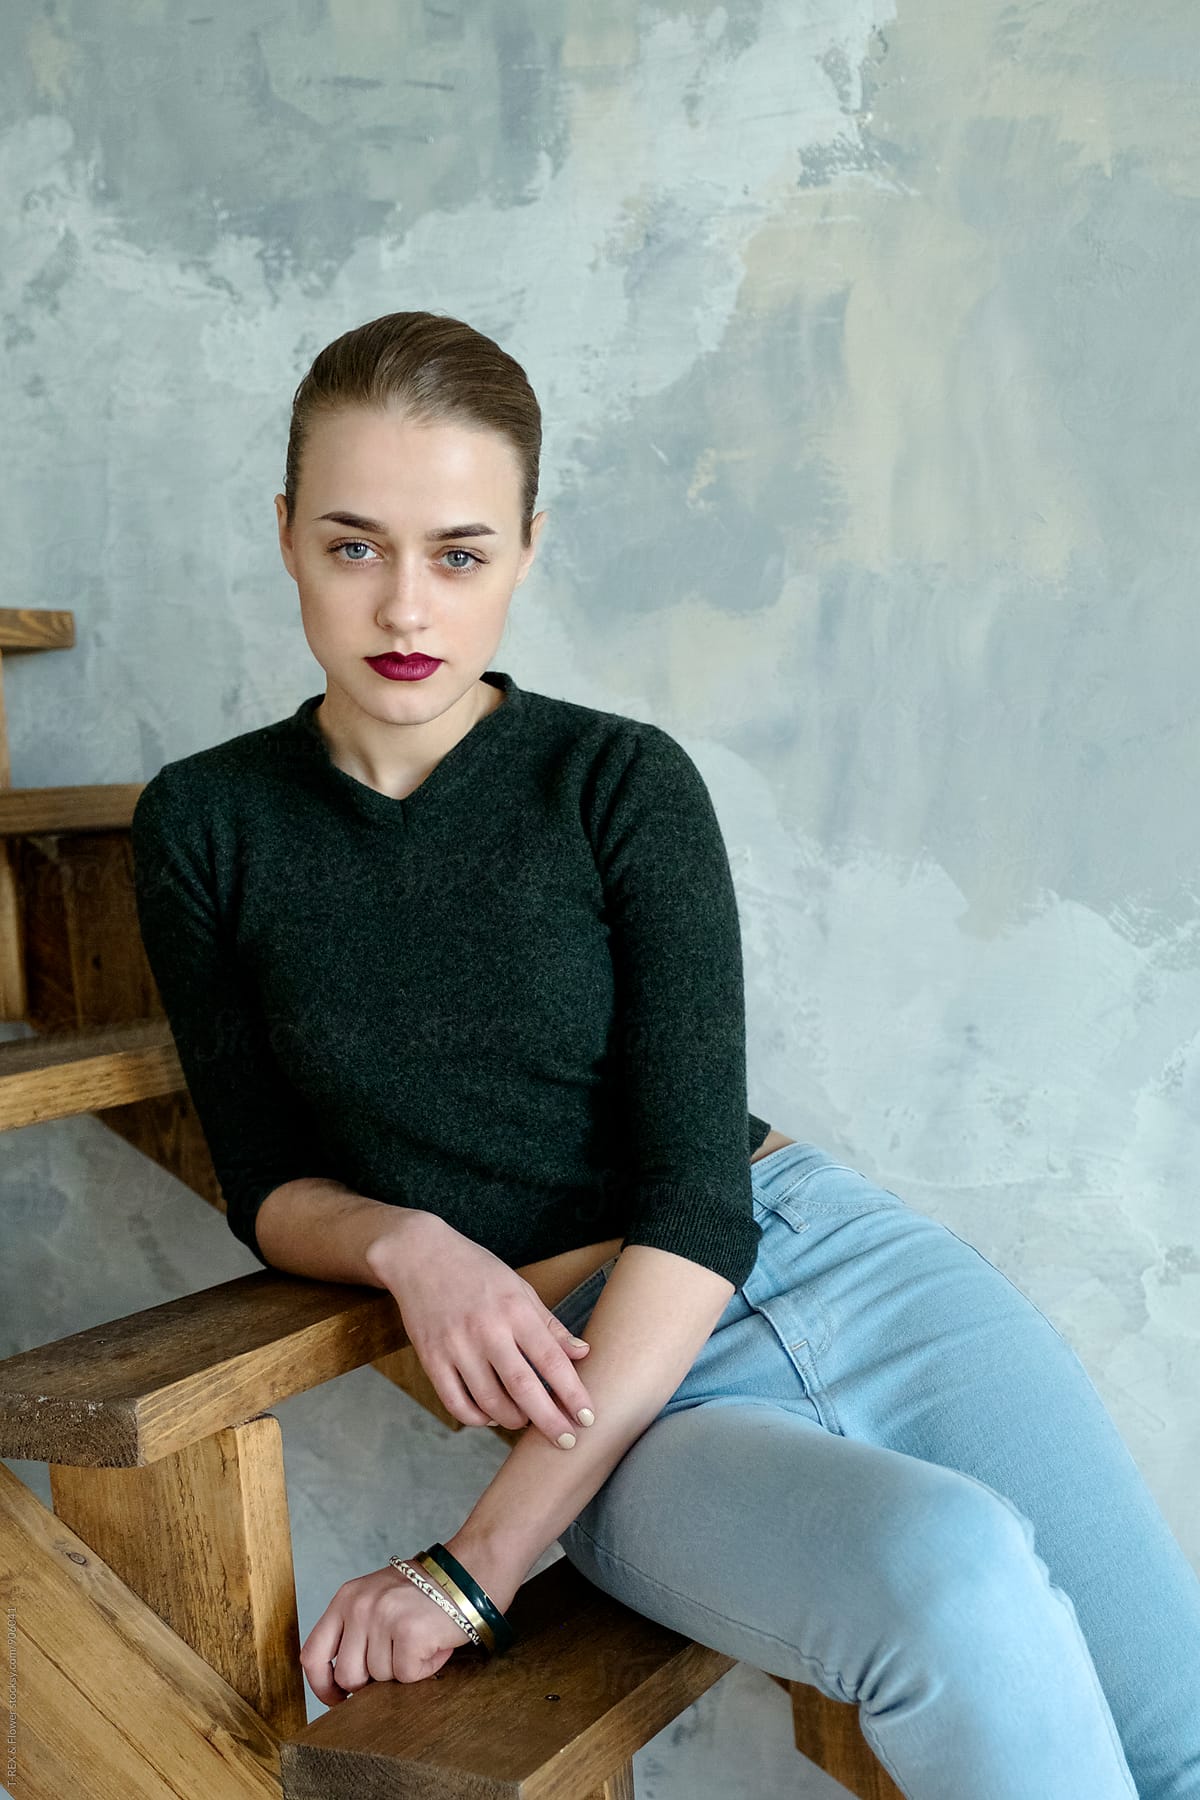 Woman In Jeans And Sweater Sitting On Stairs While Looking At Camera By Stocksy Contributor